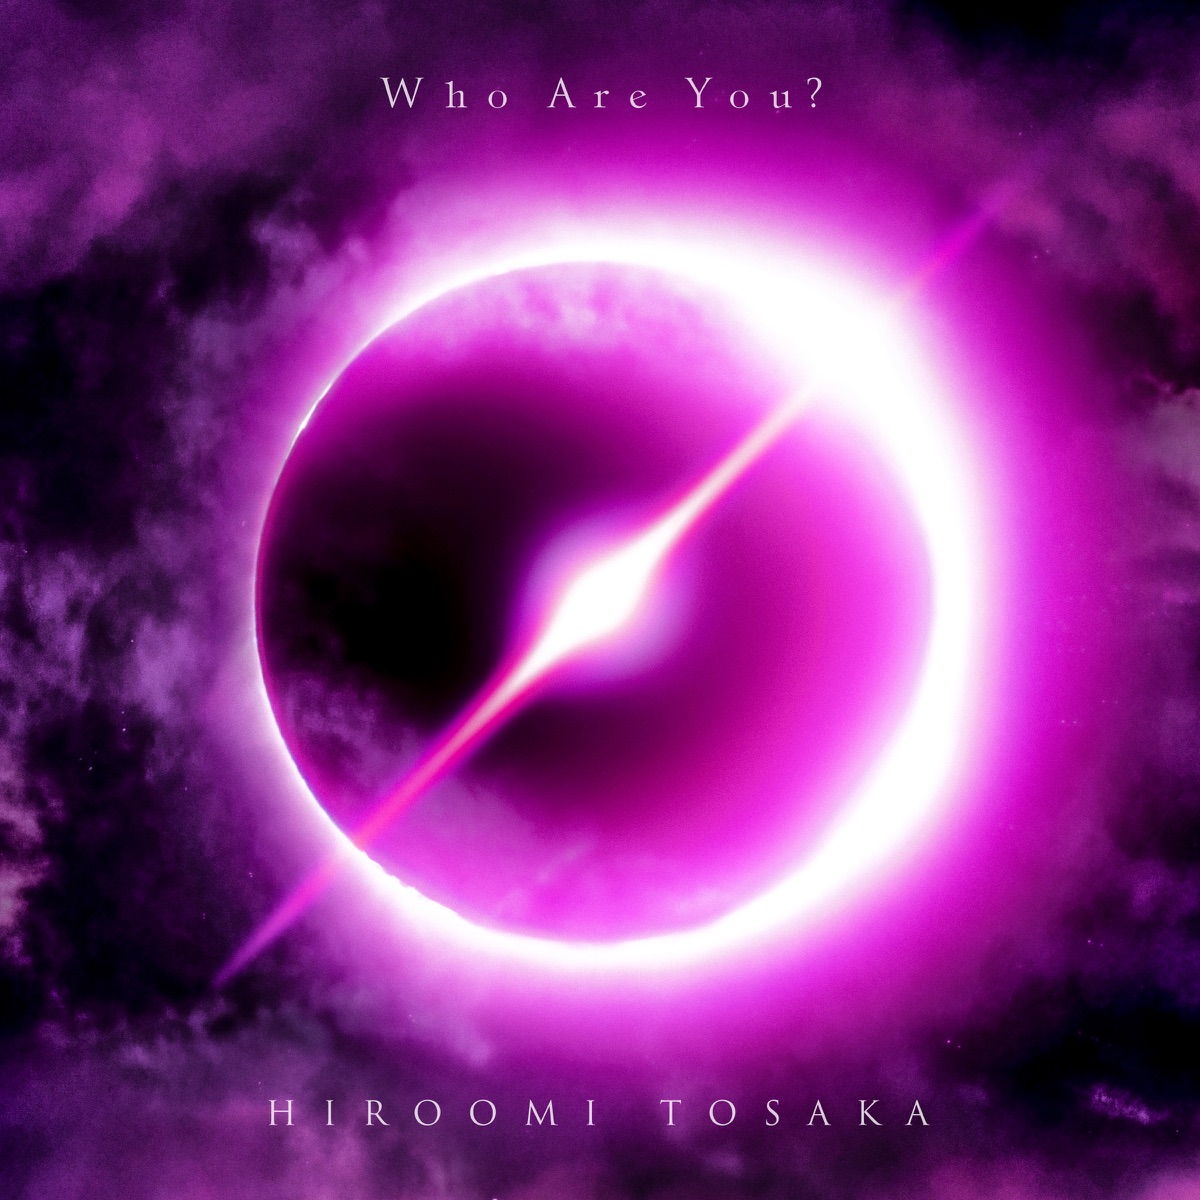 『HIROOMI TOSAKA - Who Are You?』収録の『Who Are You?』ジャケット